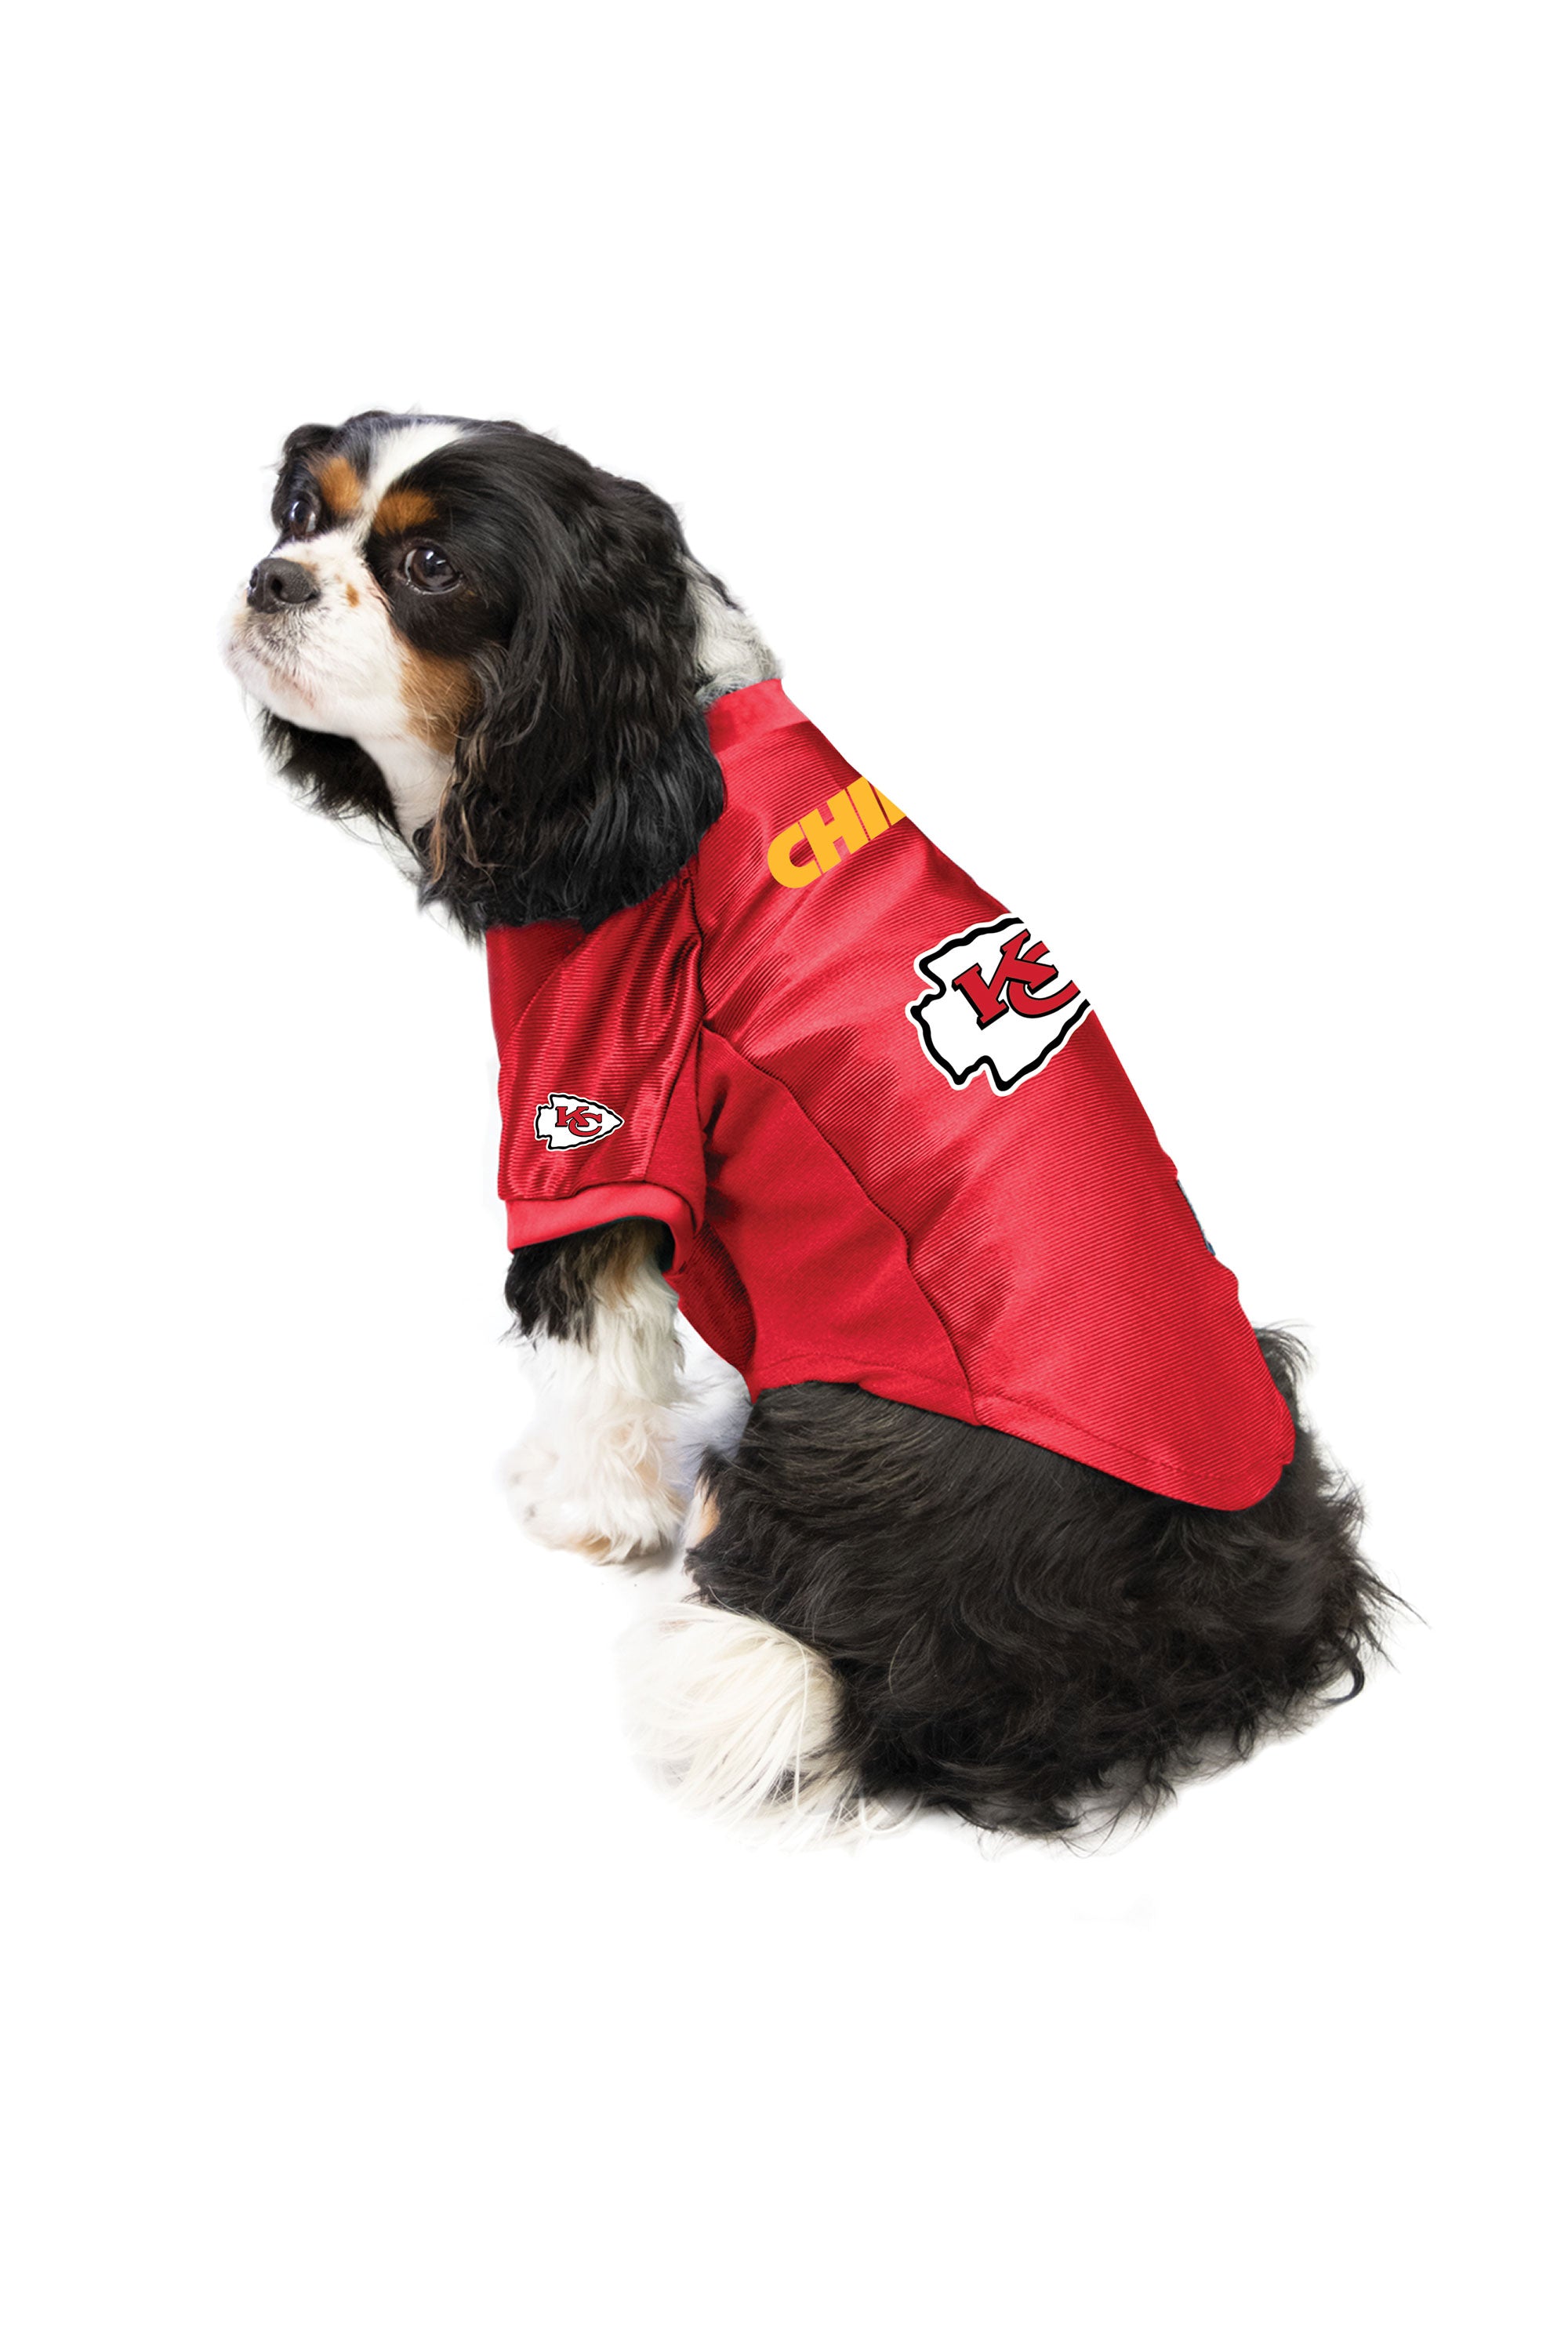 chiefs jerseys for dogs